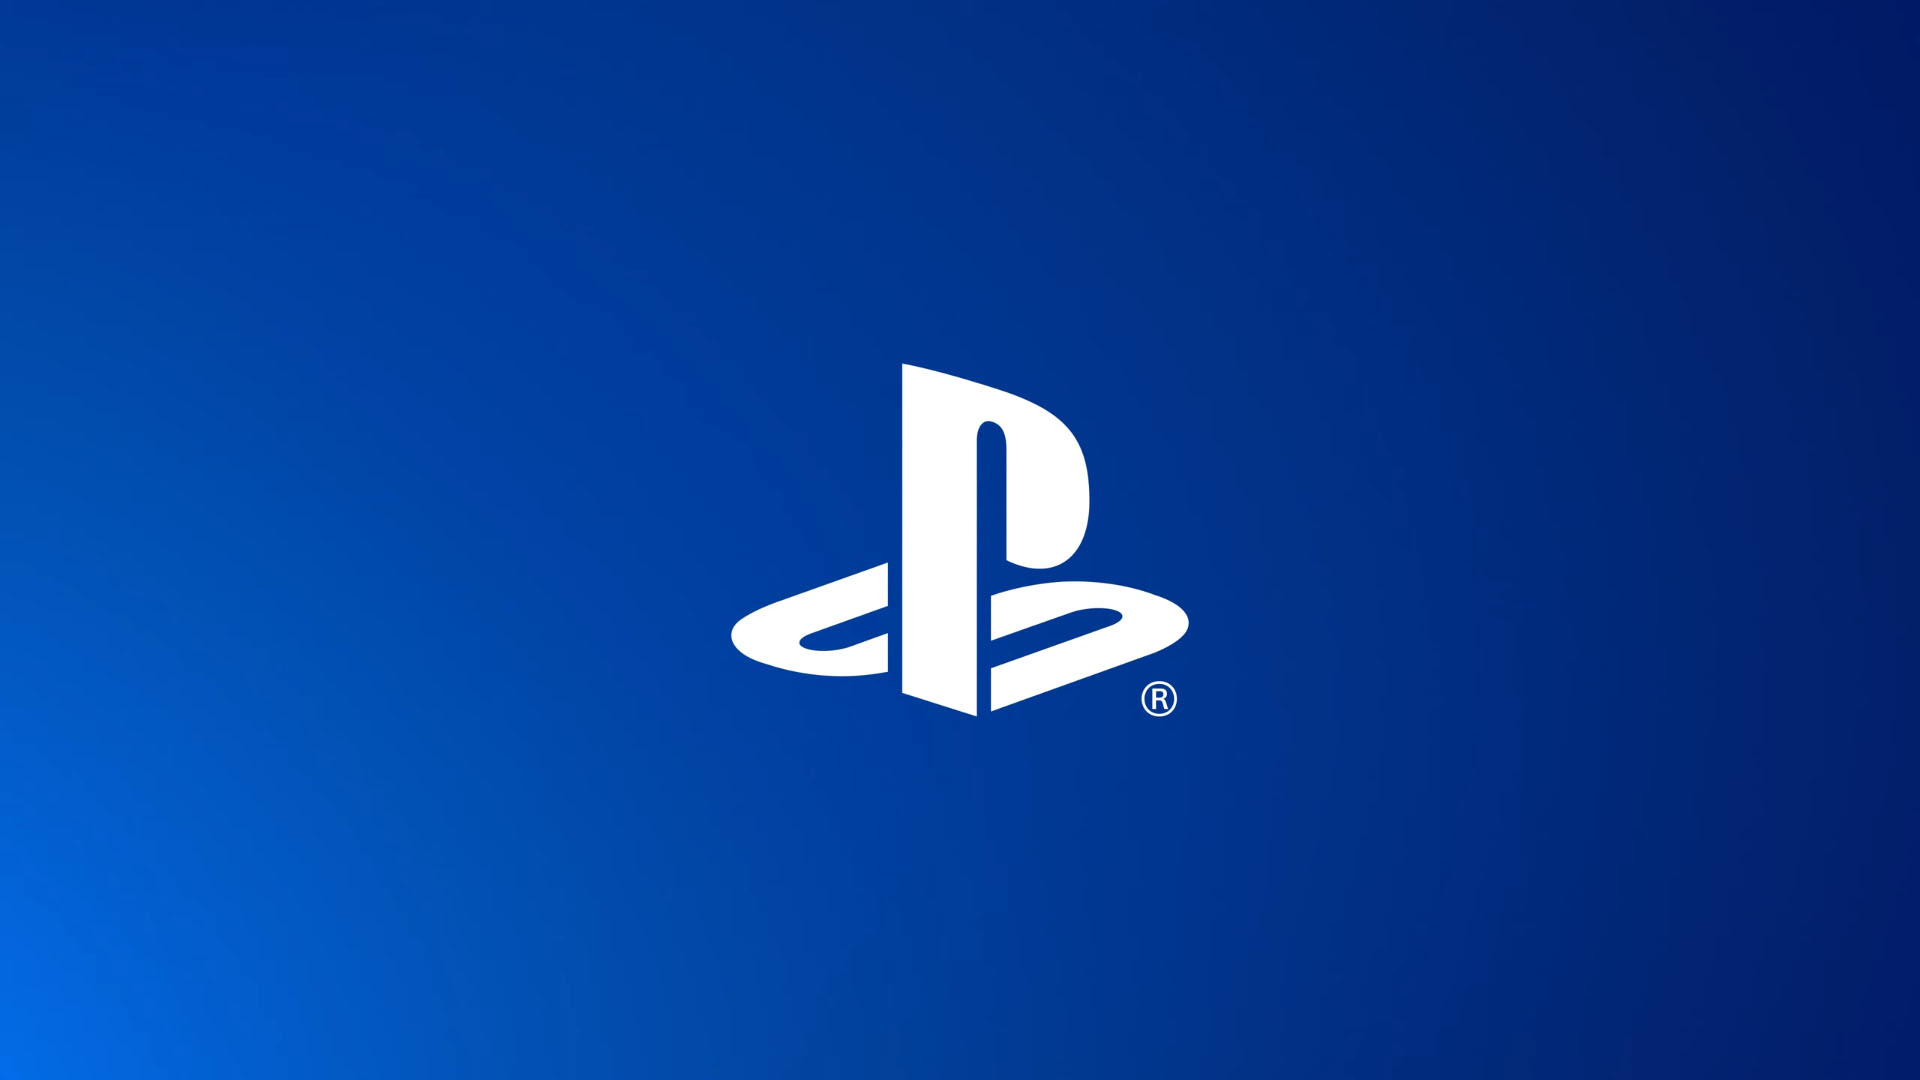 Where's PlayStation - and Sony's games - headed in 2023?